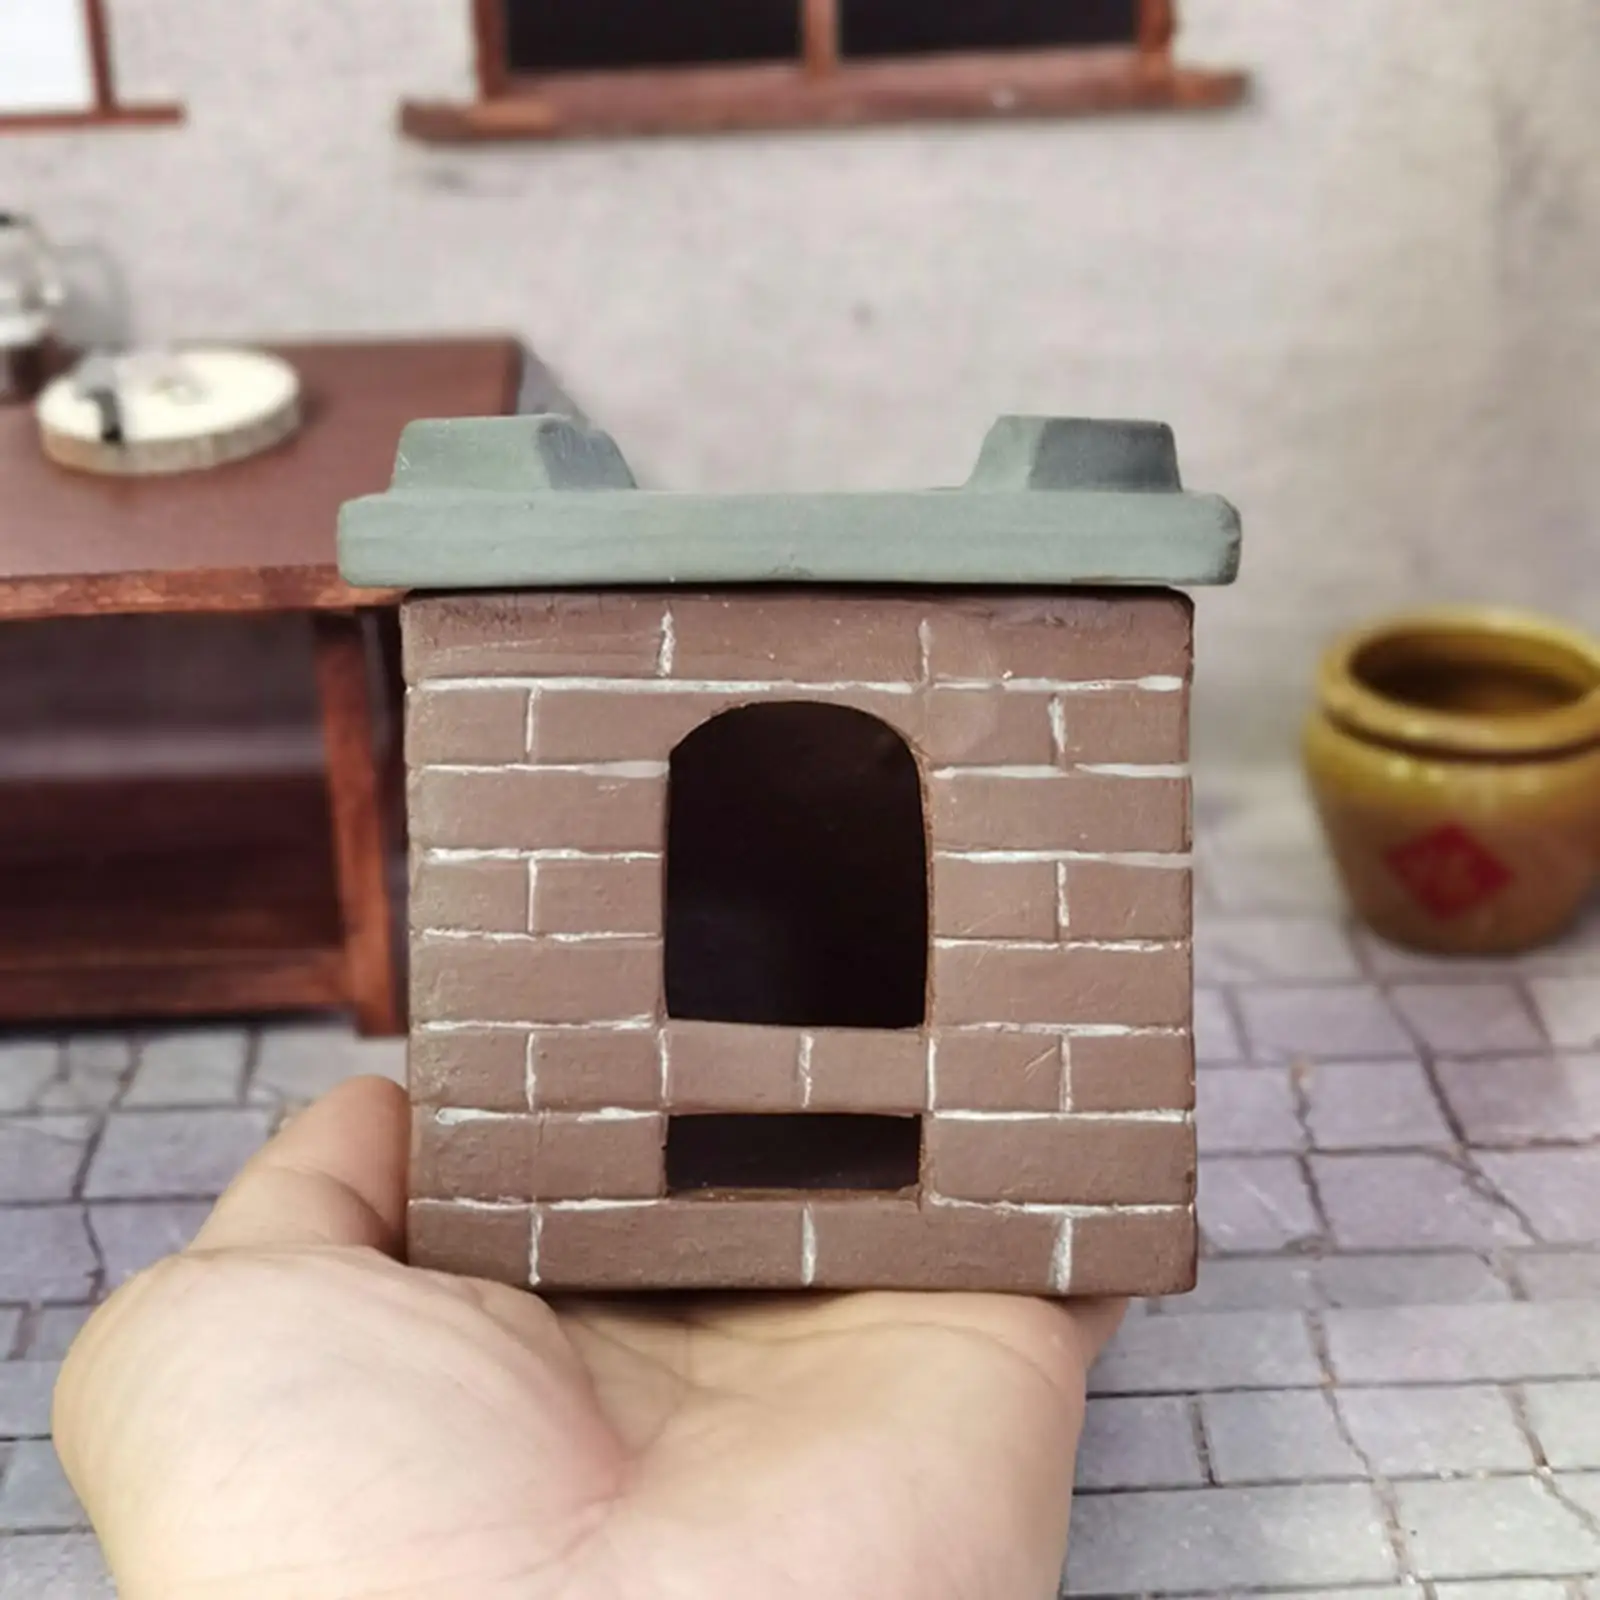 Dollhouse Stove Miniature Decor Props Toy Dollhouse Furniture for Girls Boys